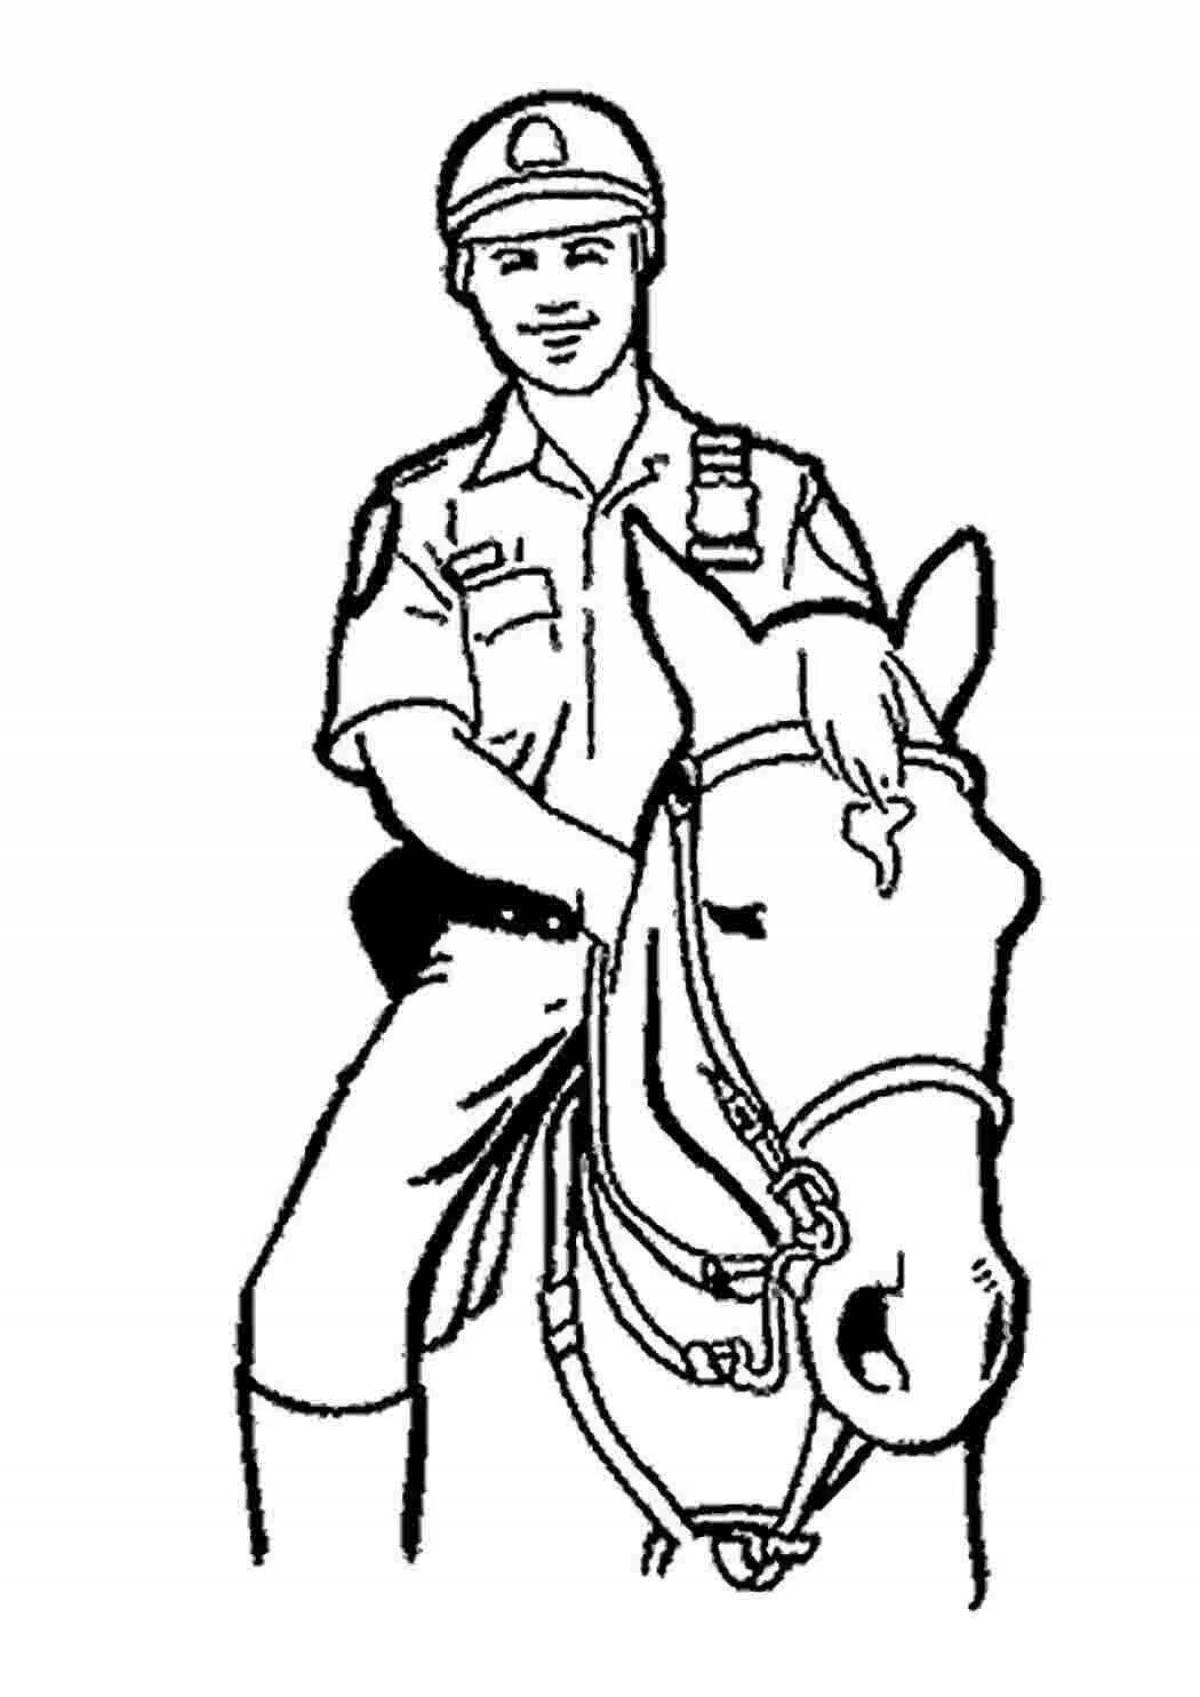 Animated Russian police coloring book